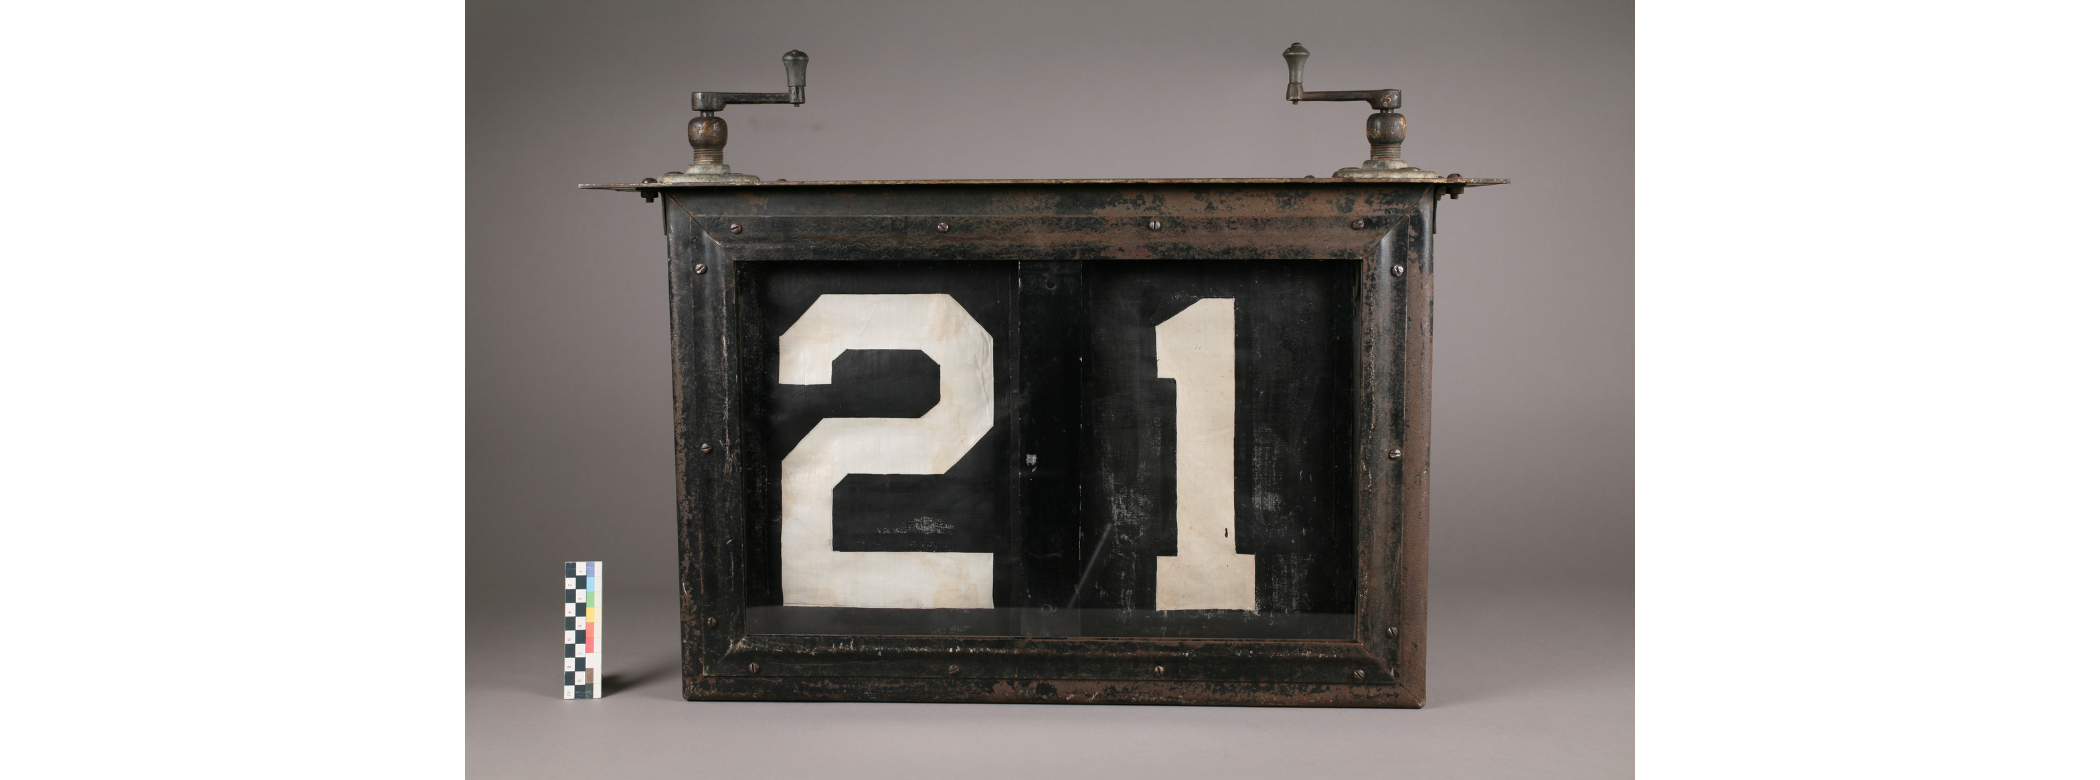 The rectangular sign with cranks on either end of the top, with two strips of fabric showing the numbers 2 and 1. The sign is much clearer than in previous images above.